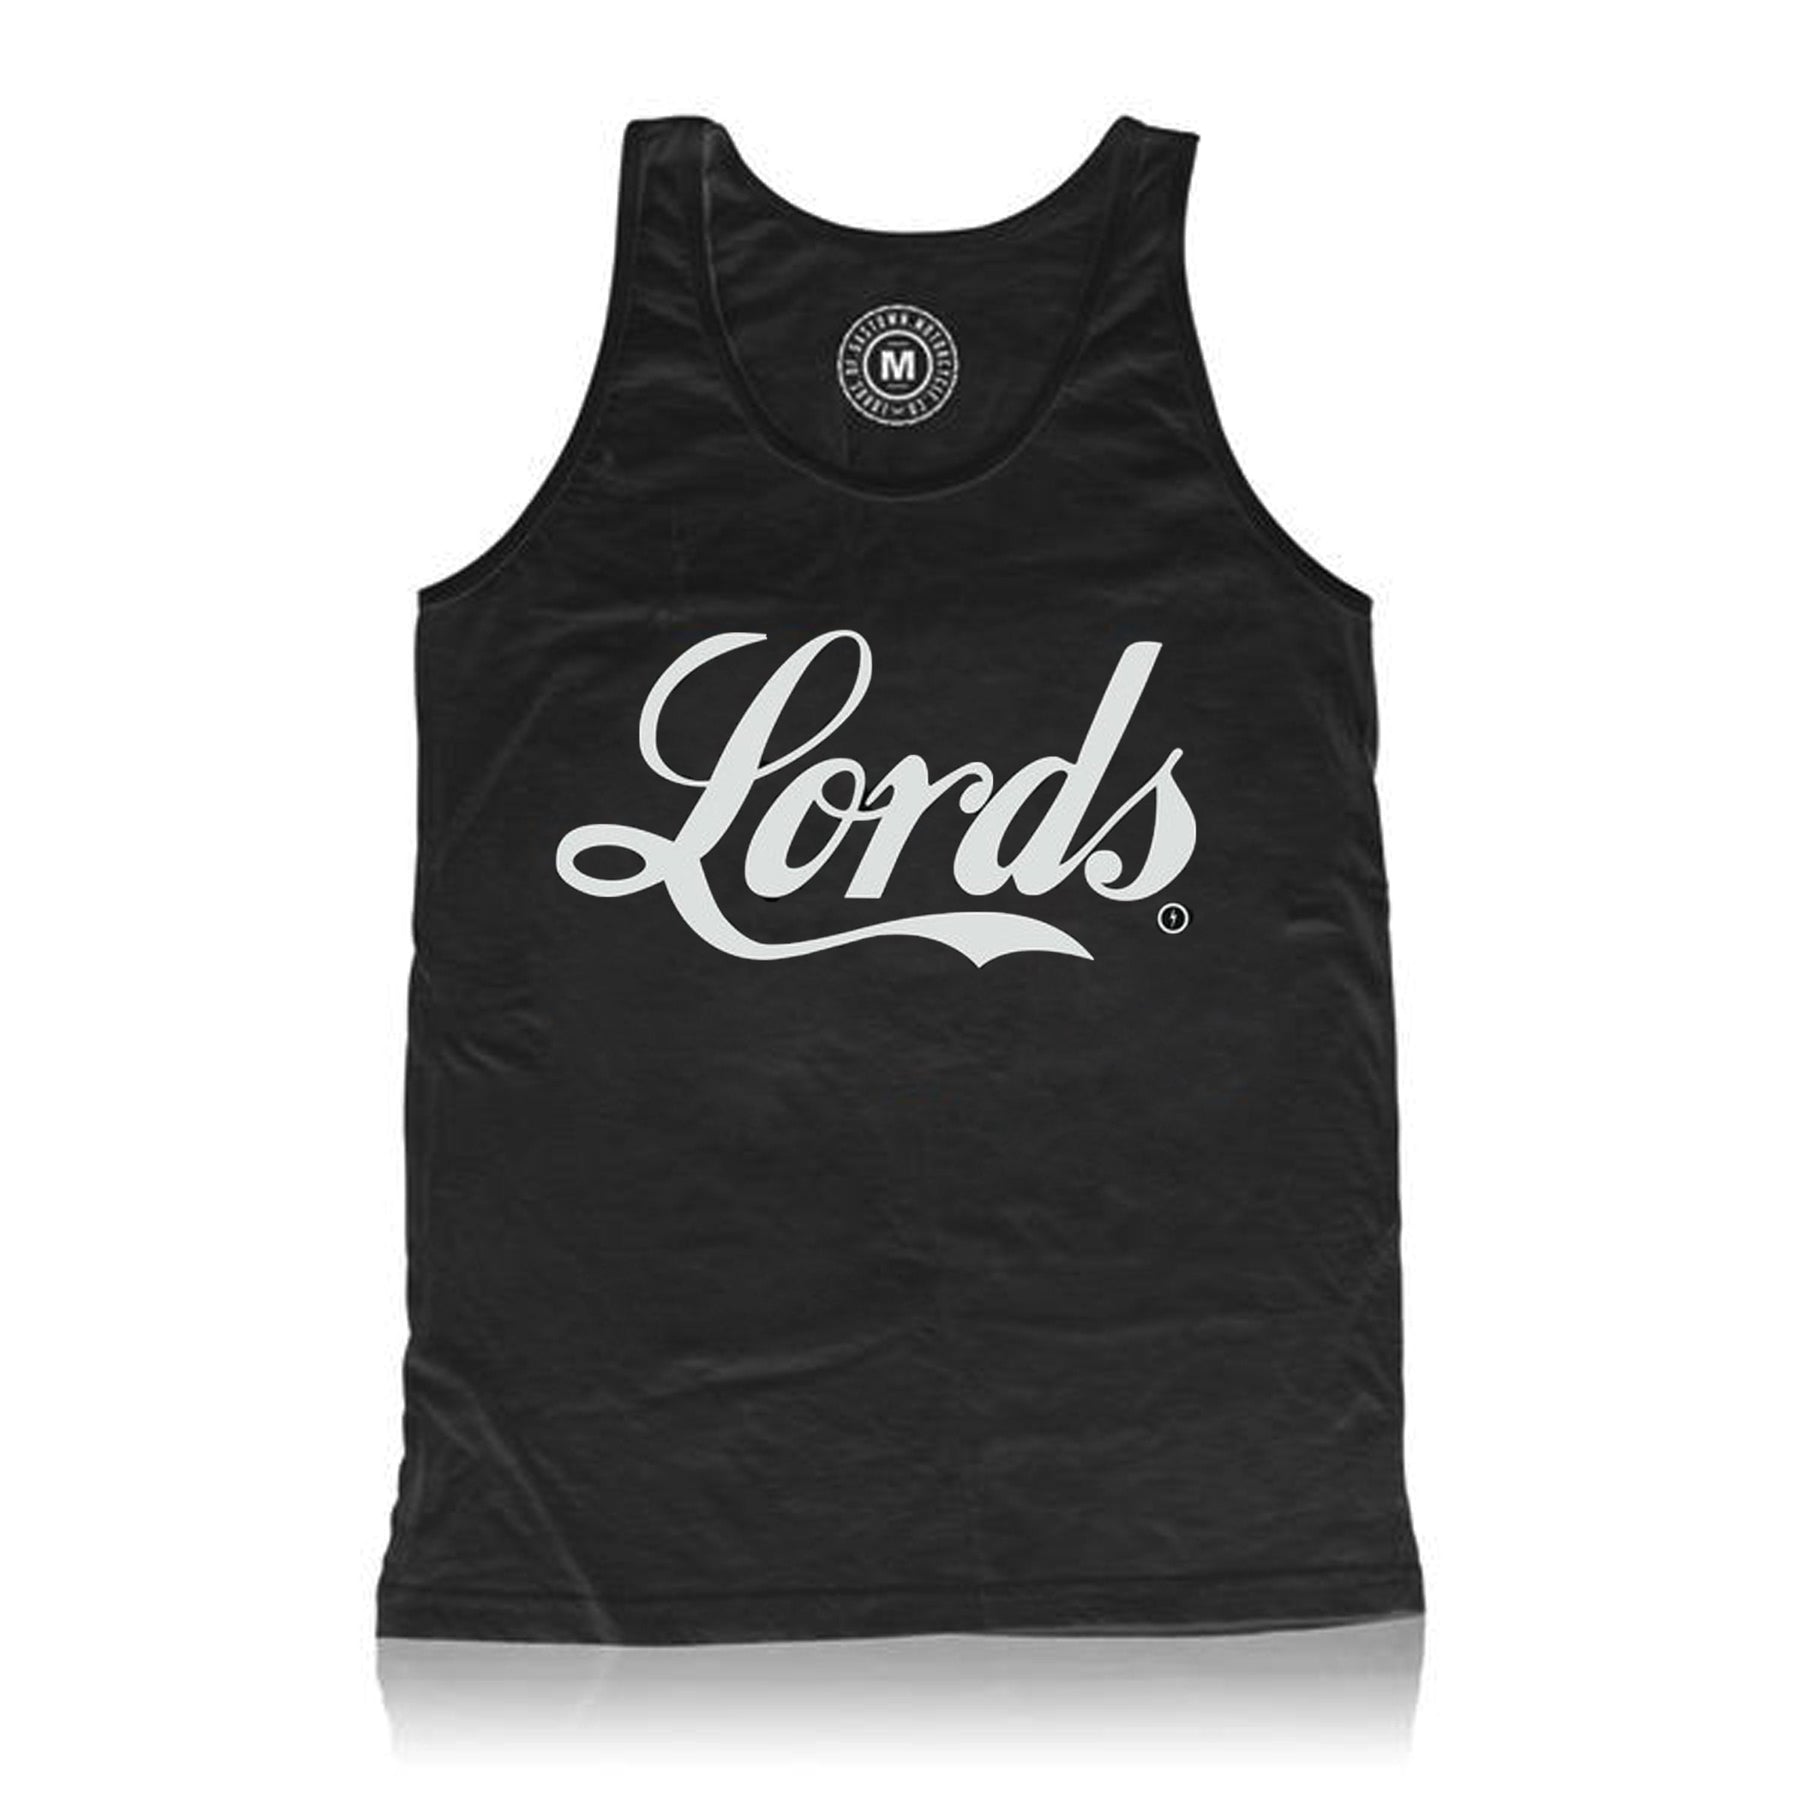 Garage Co. Tank – Lords Of Gastown Motorcycle Company